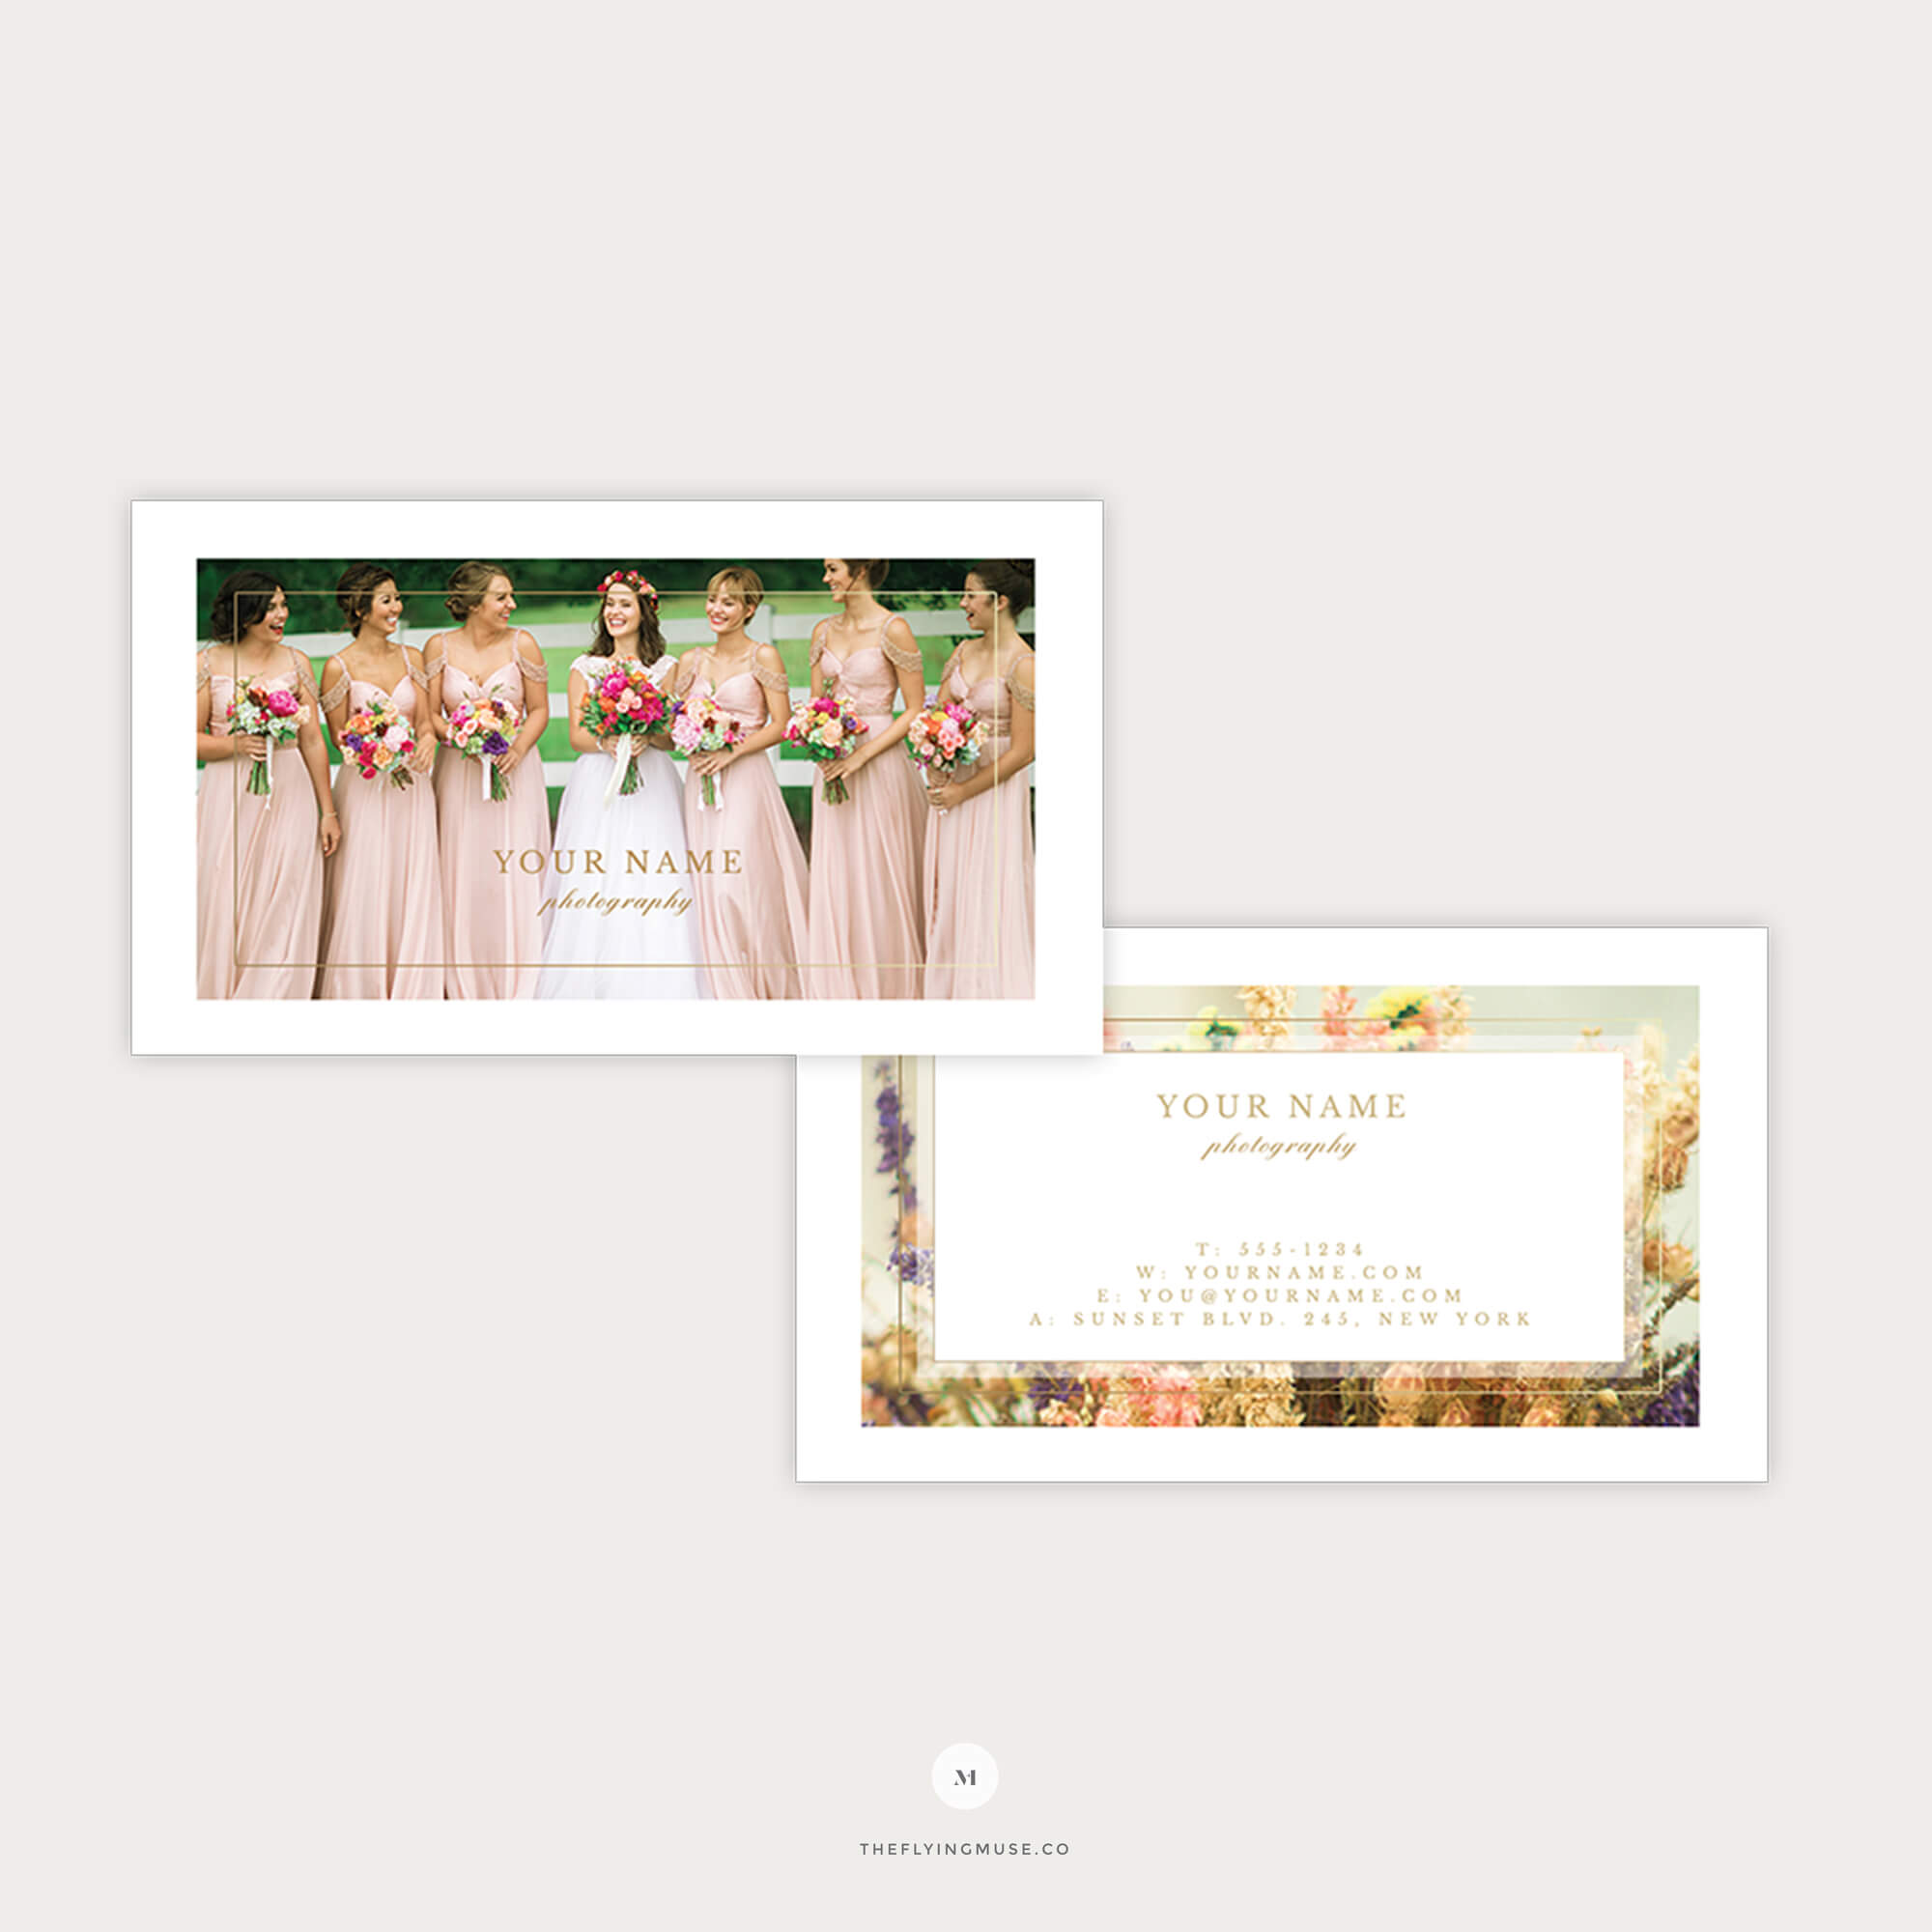 Elegant Wedding Photography Business Card Template | The Flying Muse Regarding Photography Referral Card Templates